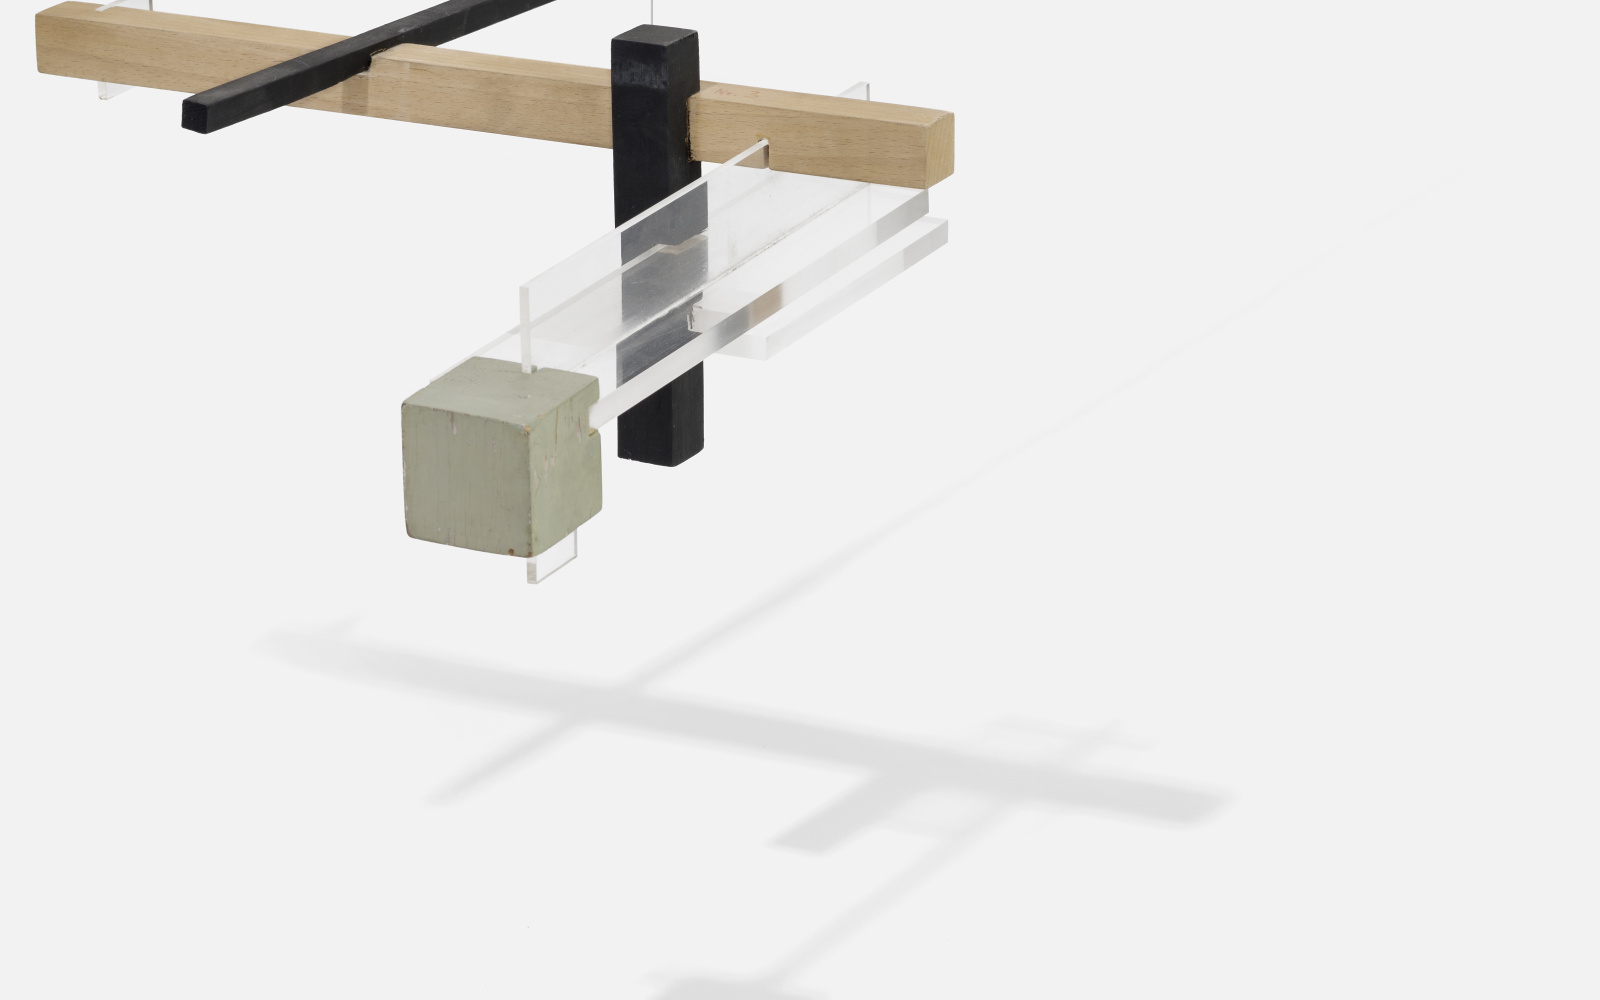 On a string hangs a structure of wood, plexiglass and metal, which is balanced and the protruding beams are horizontal.